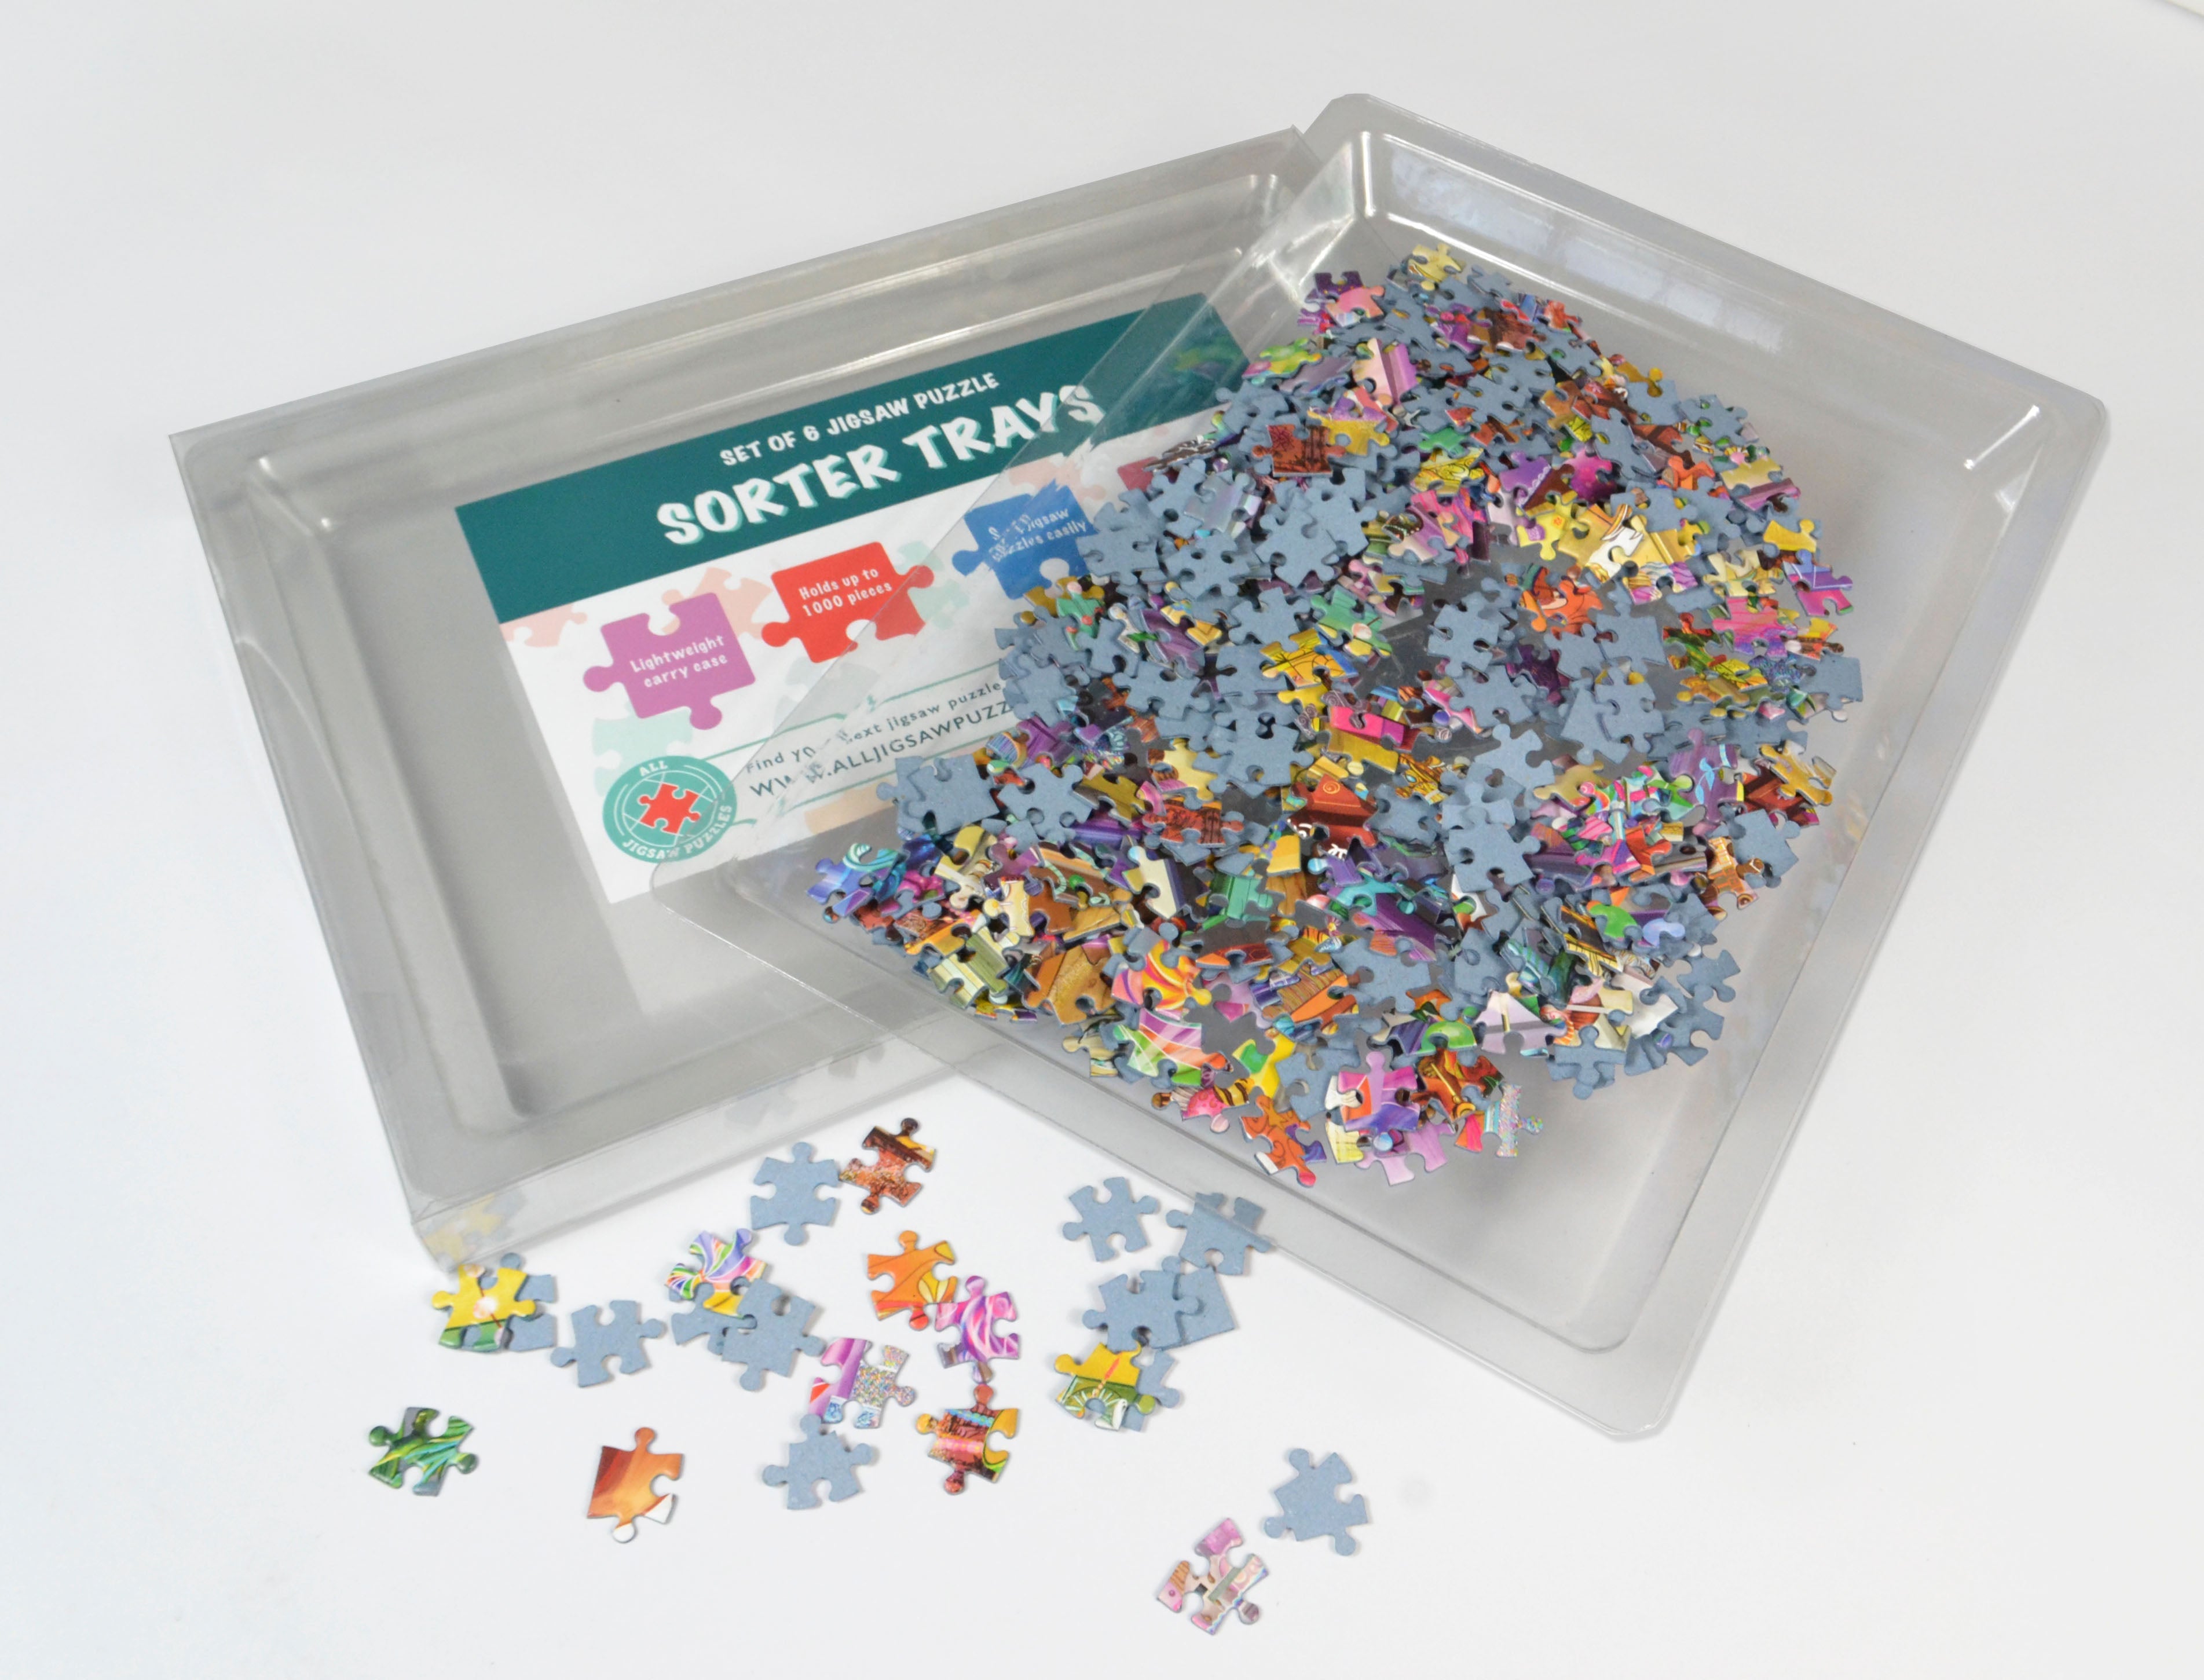 Masterpieces Puzzles Sort & Save Stackable Puzzle Trays